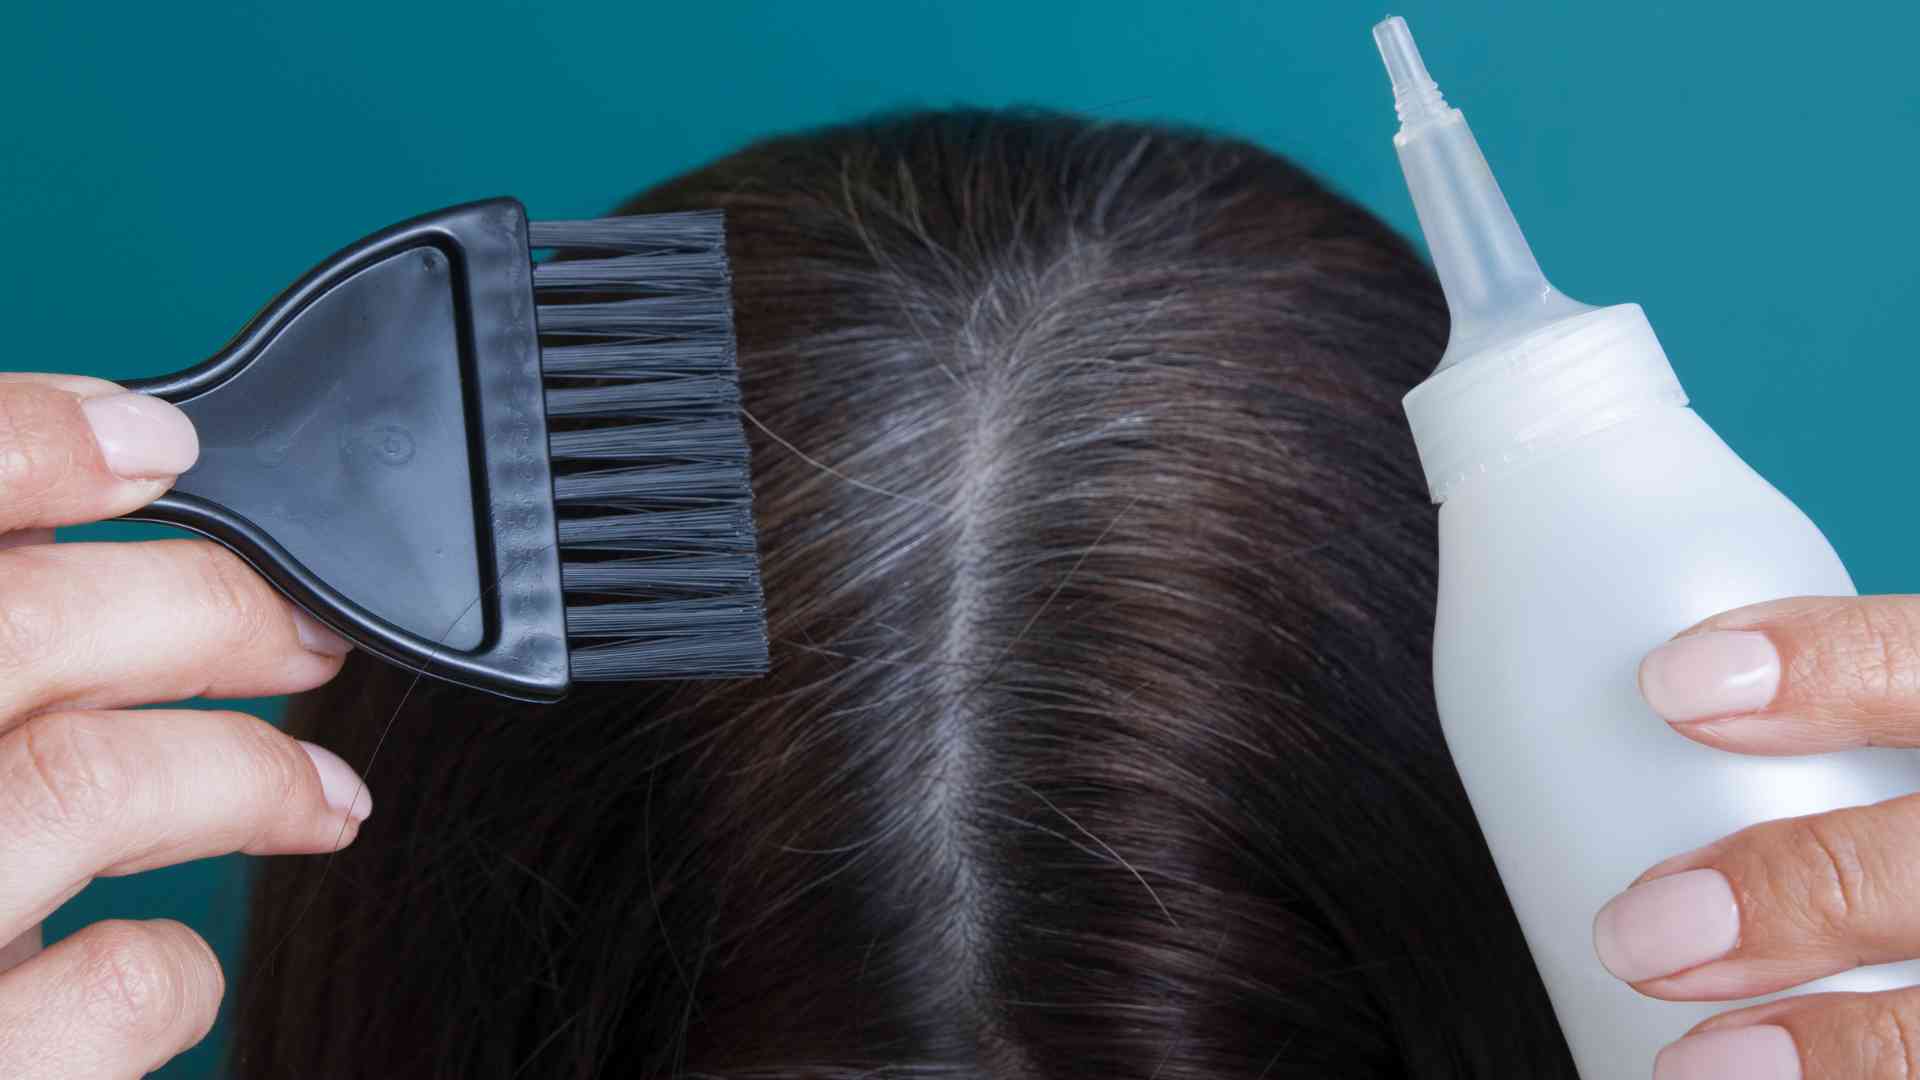 Can you explain the connection between hormonal changes and hair loss